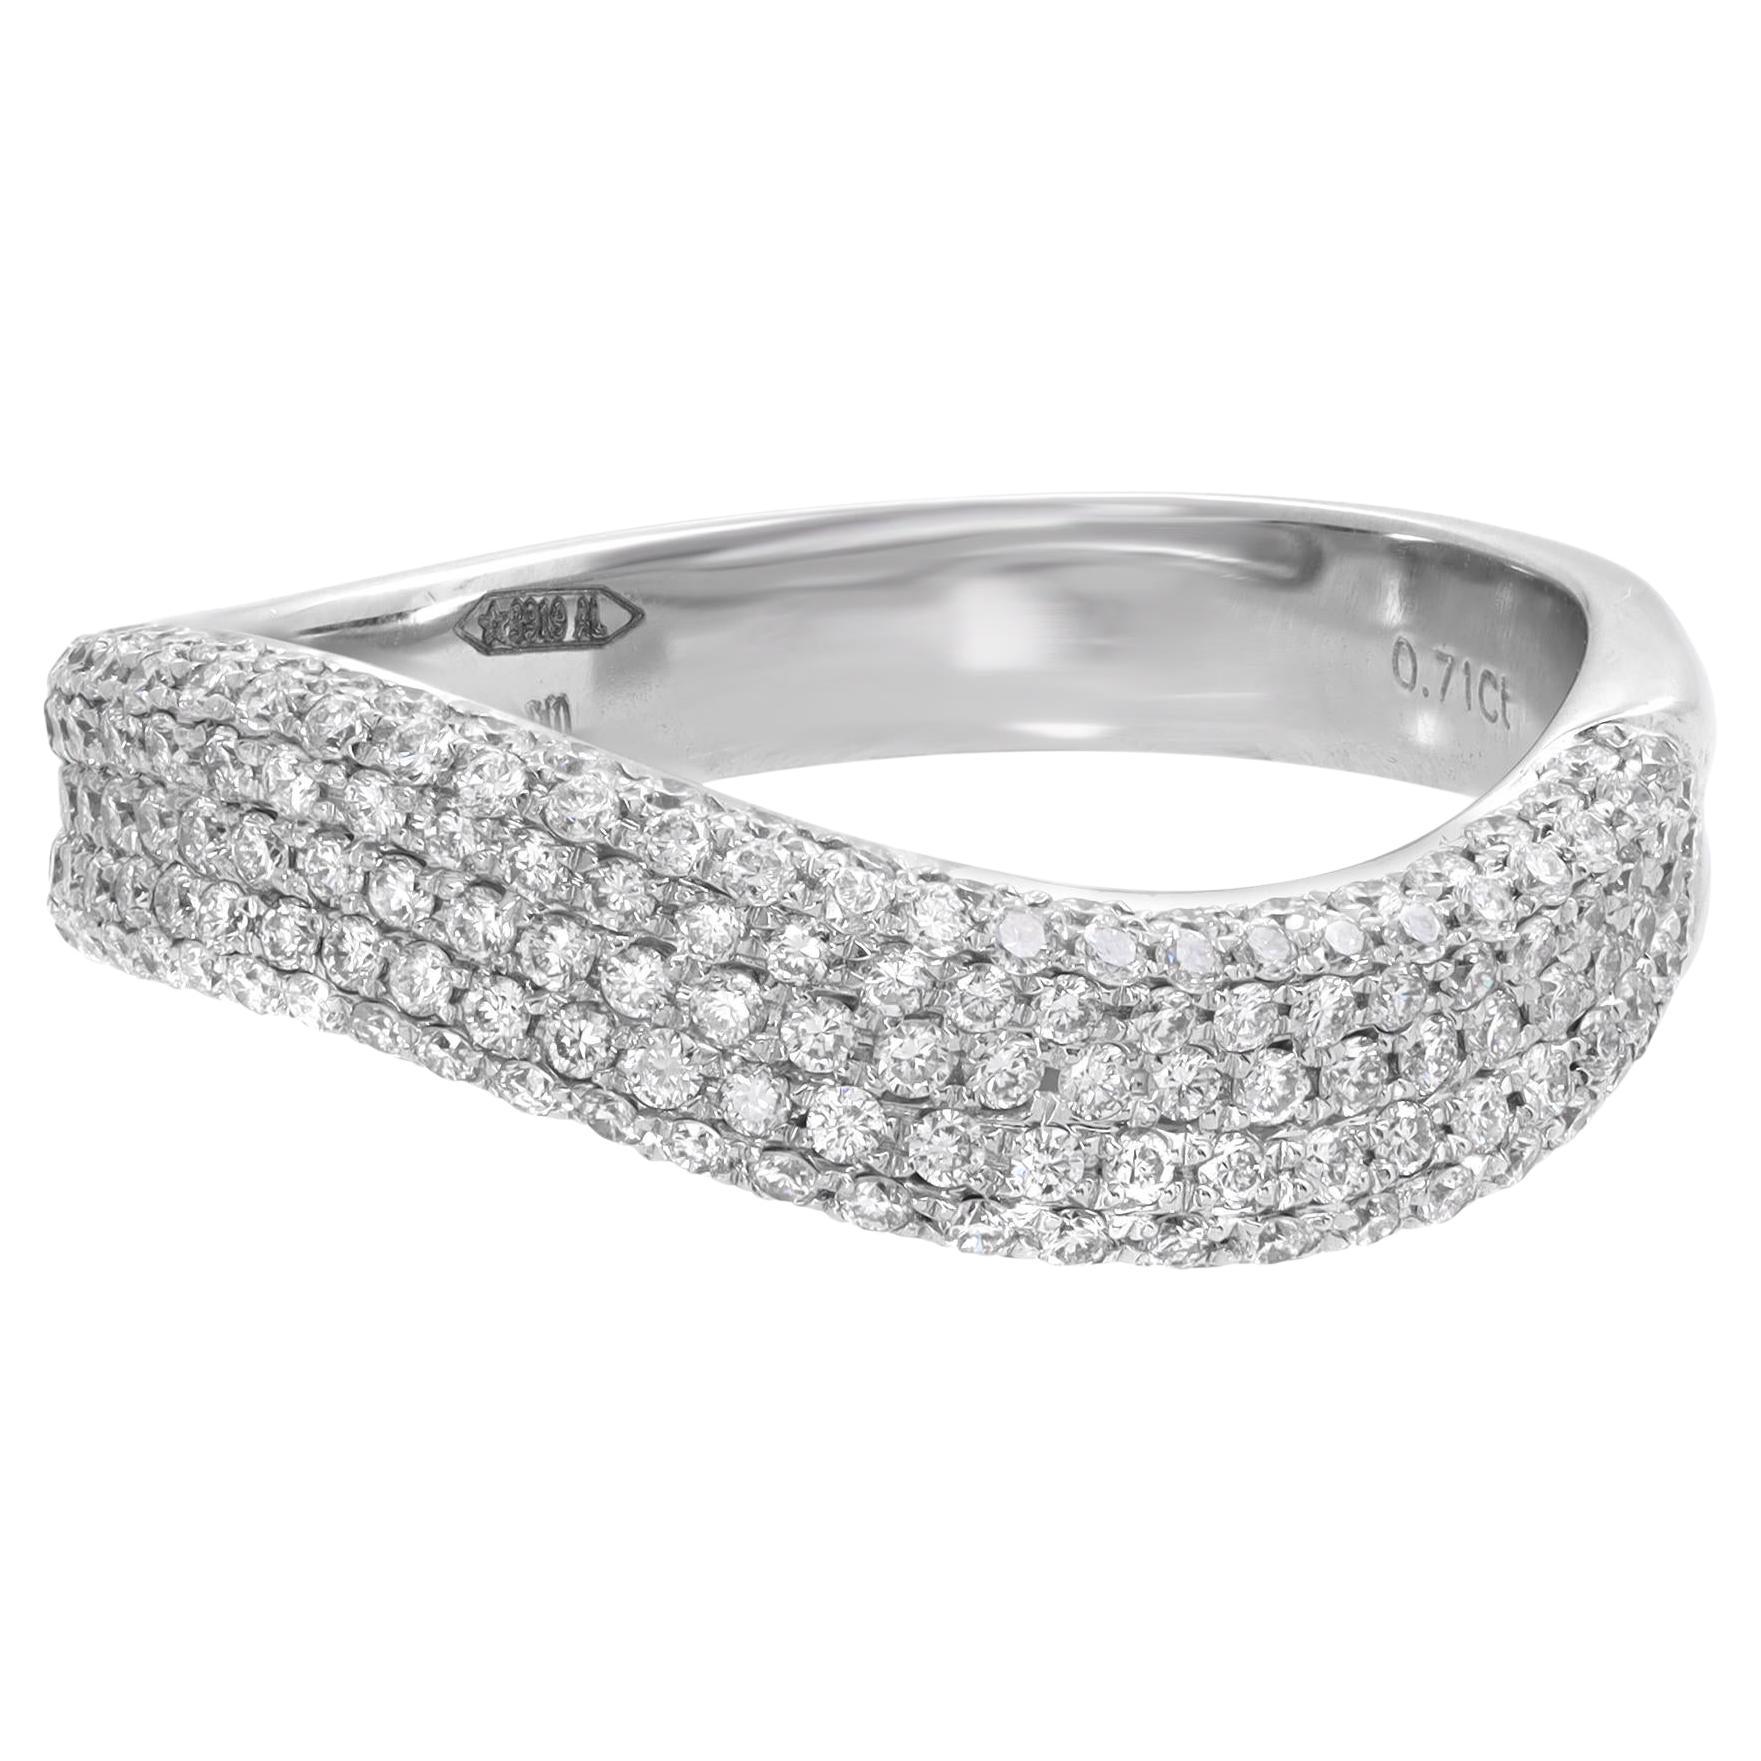 Piero Milano Natural Diamond Pave Curved Ring 18k White Gold 0.71 Cttw